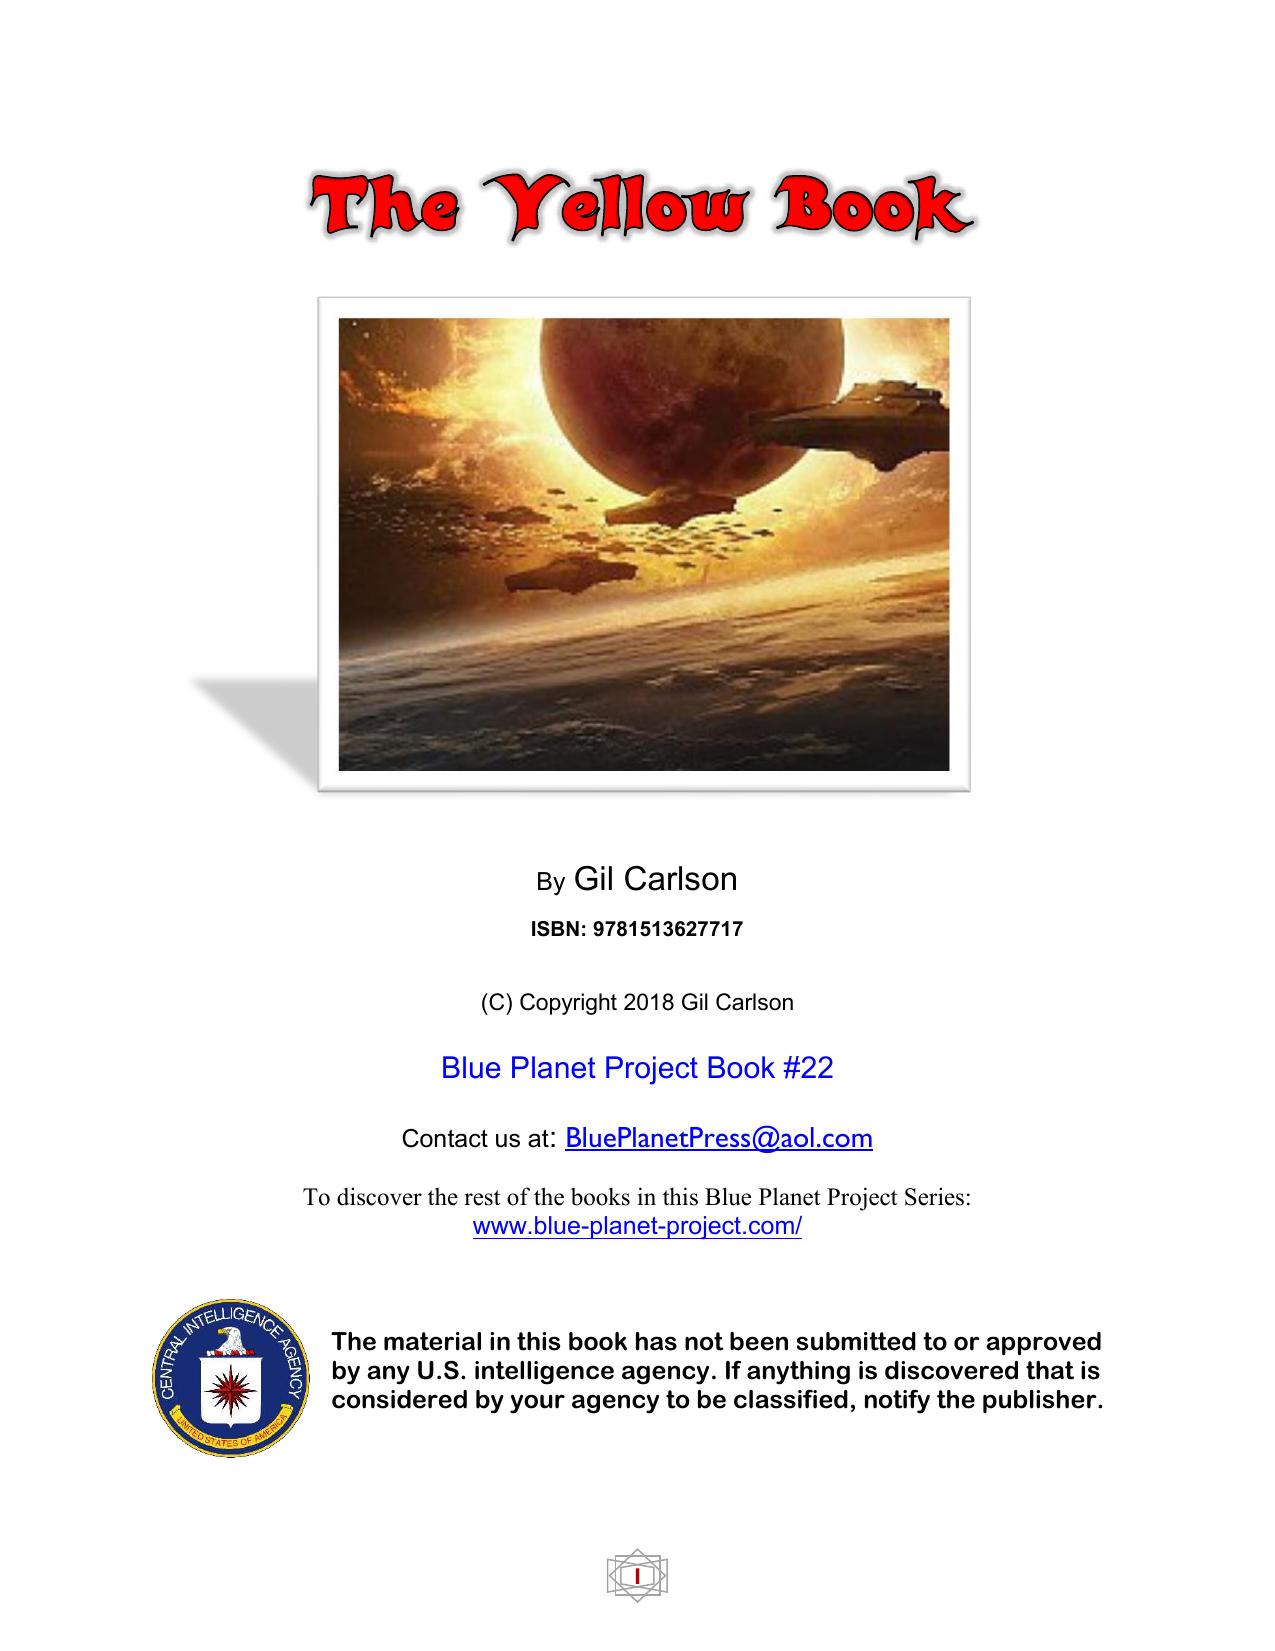 Yellow Book The History of the Aliens on Earth 2018